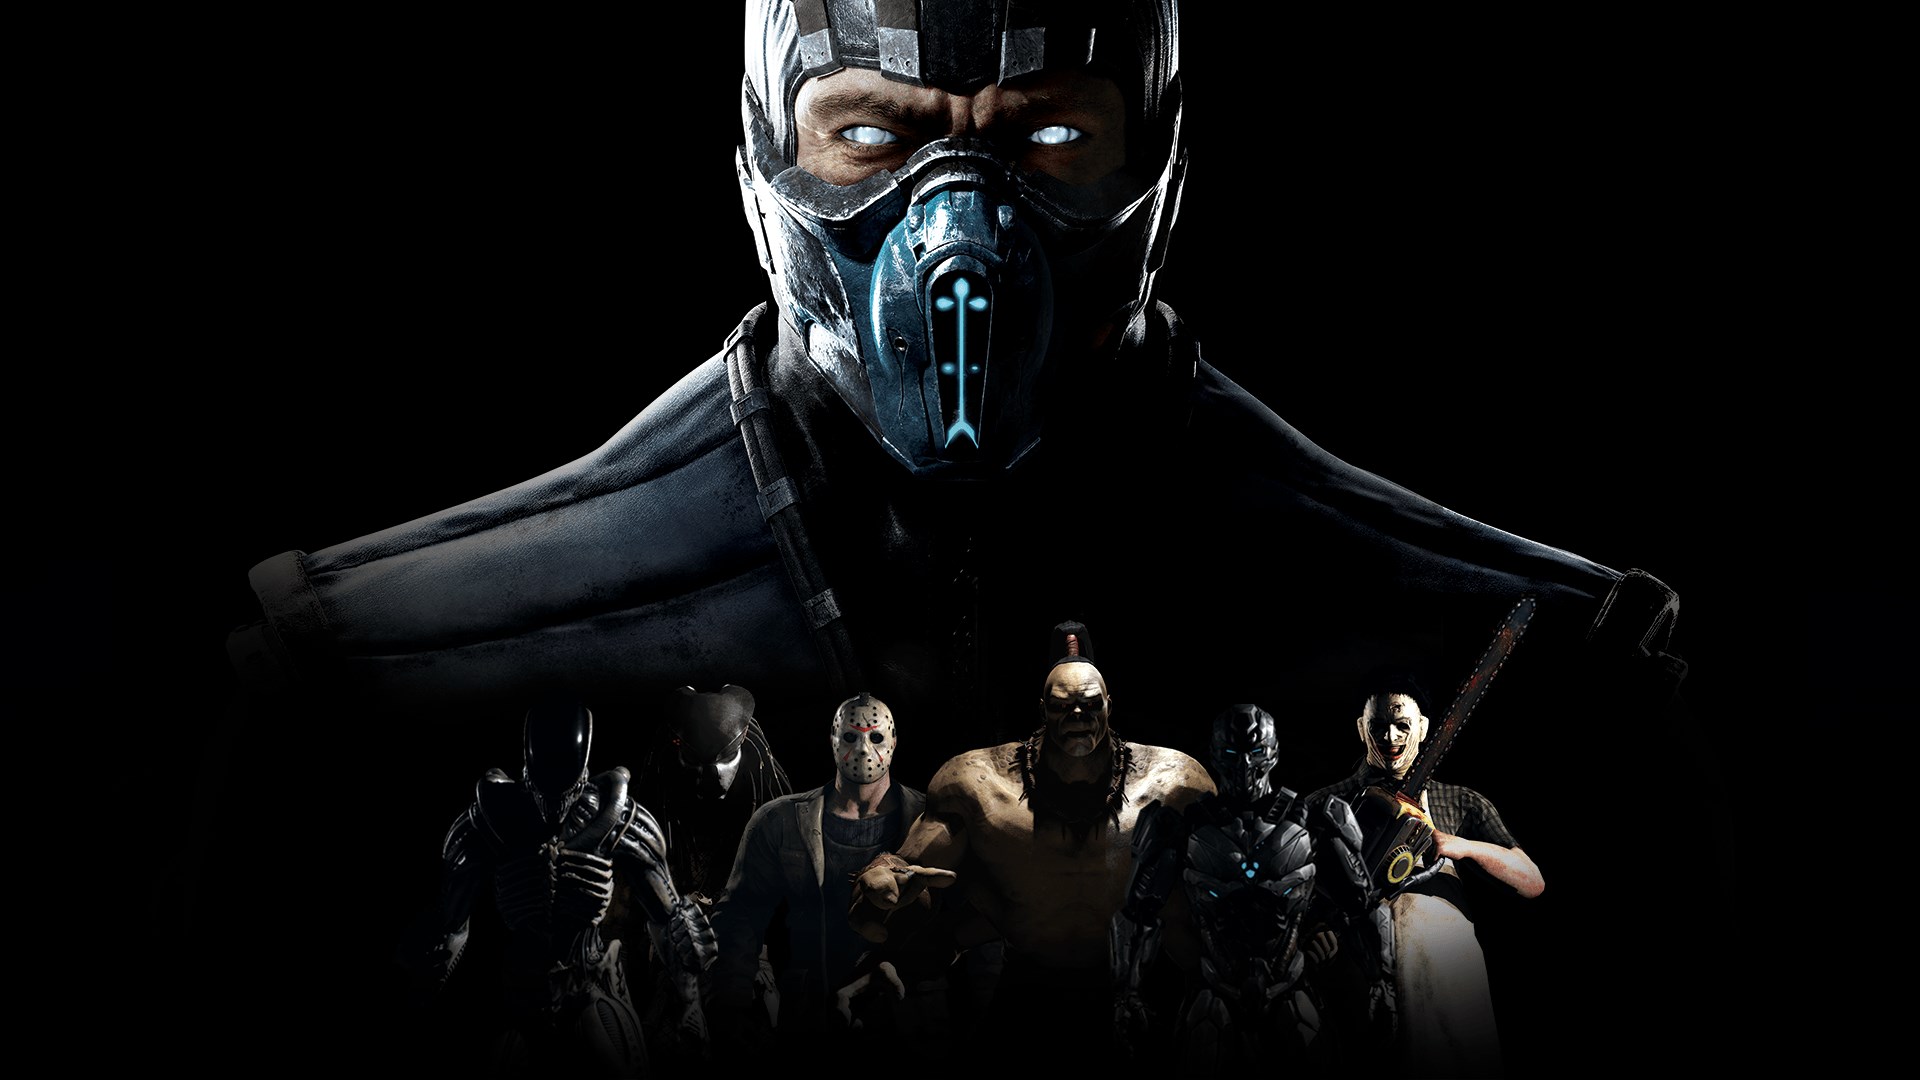 Mortal Kombat X: 15 Characters That Should Not Be In MKX! 